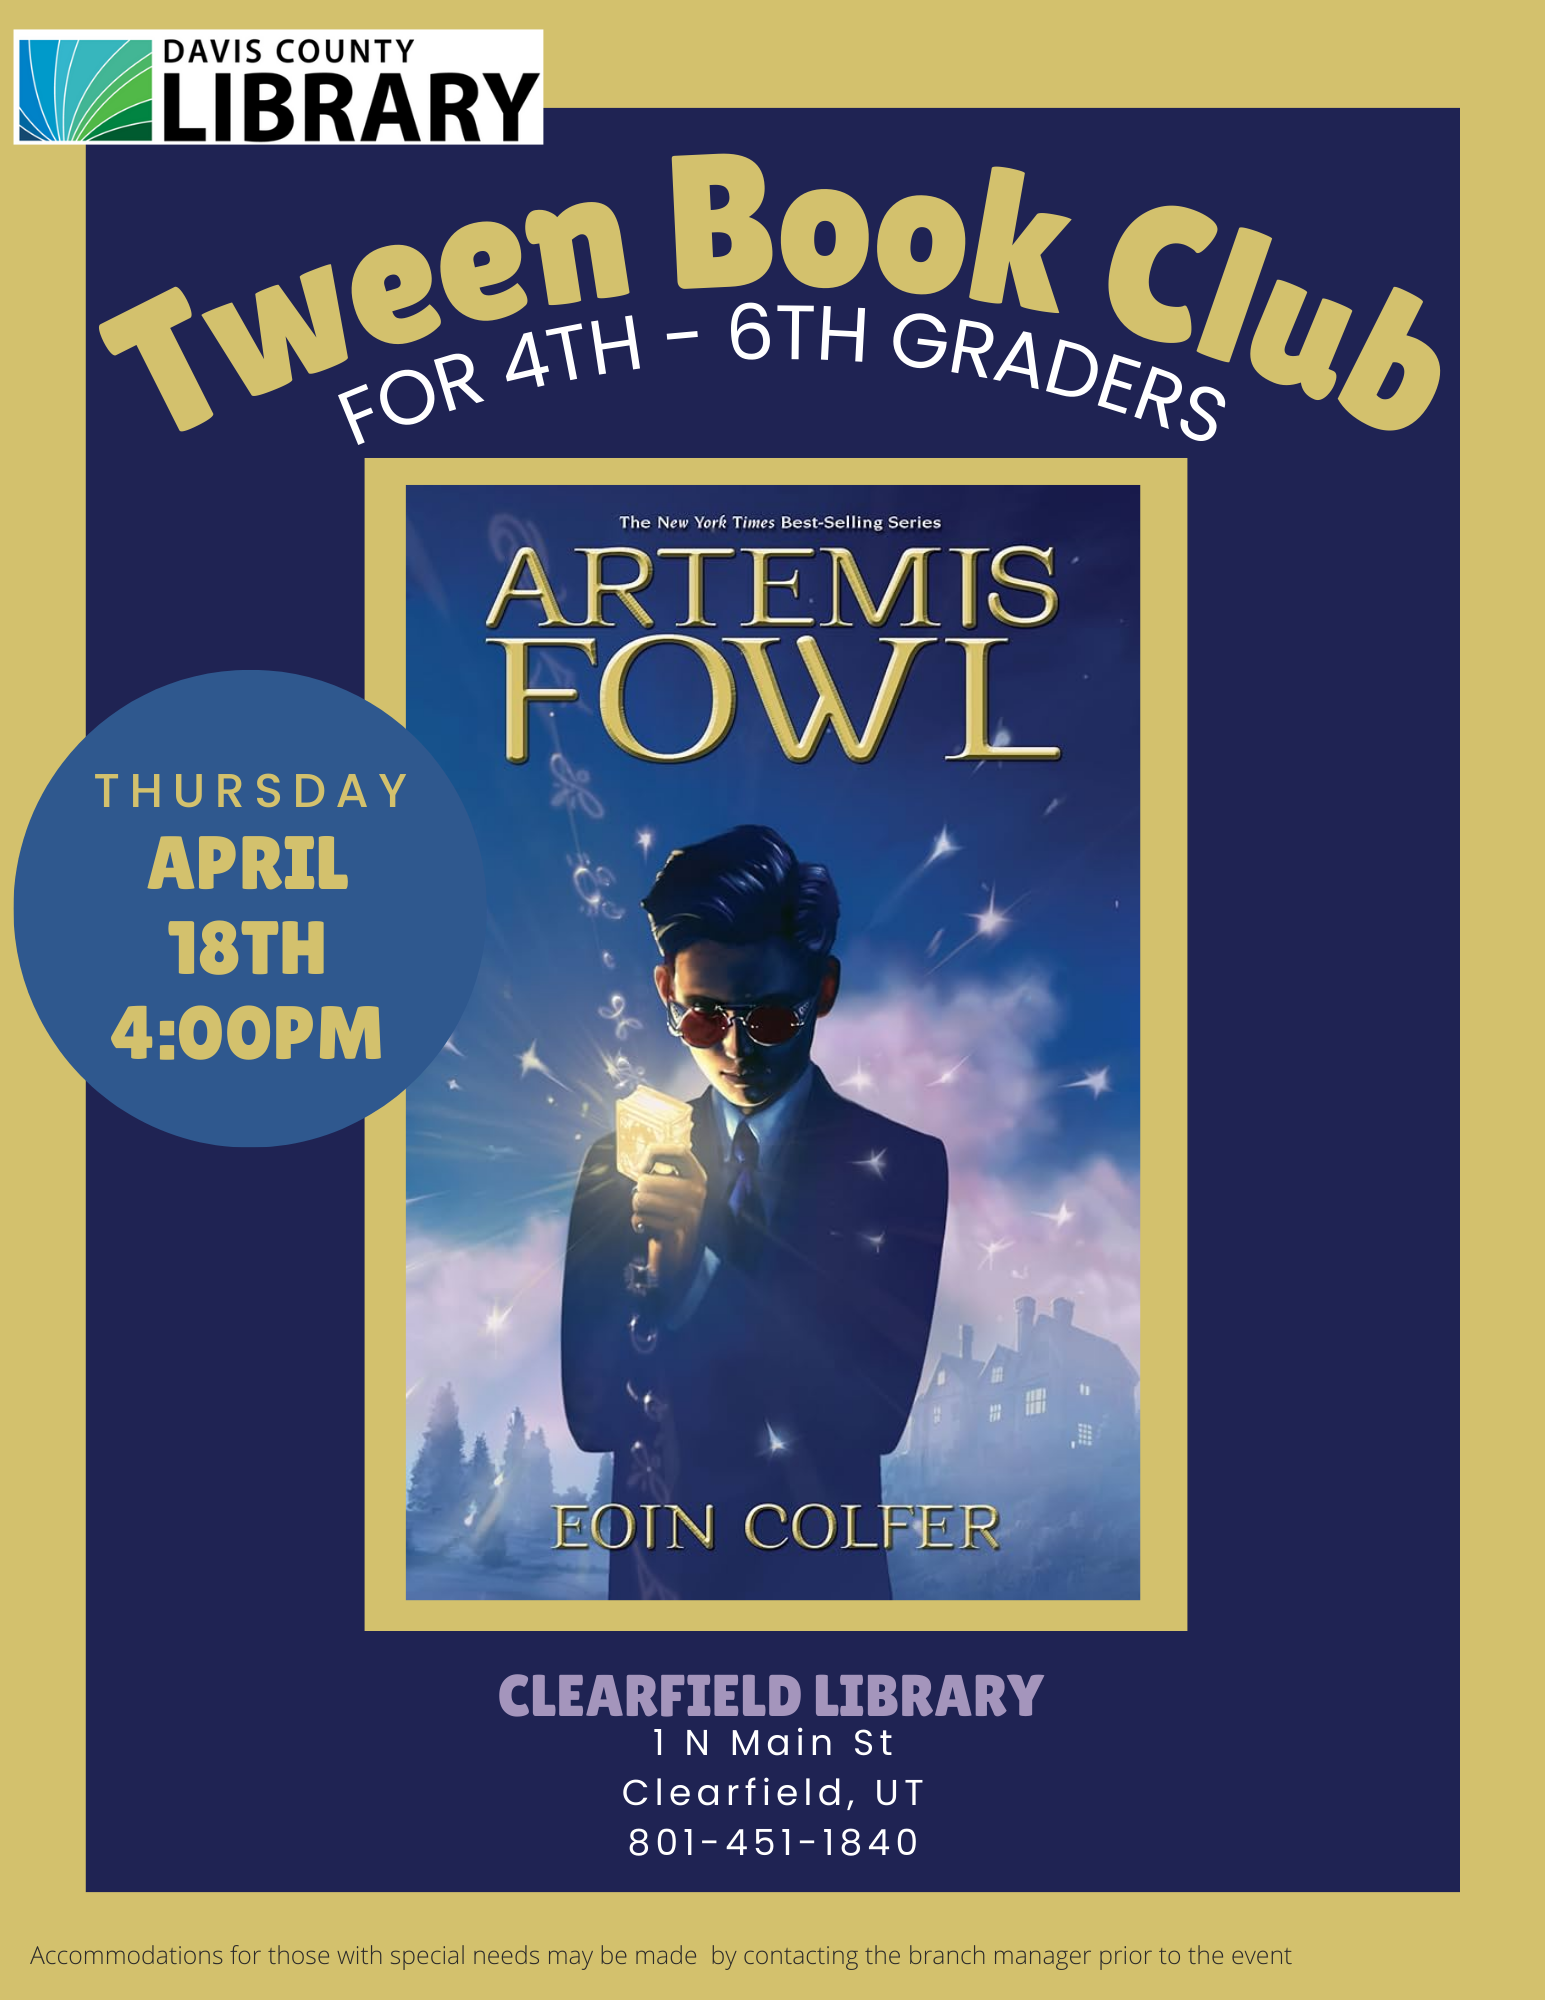 Tween Book Club For 4th - 6th Graders. April 18th, 4:00pm. Artemis Fowl by Eoin Colfer.